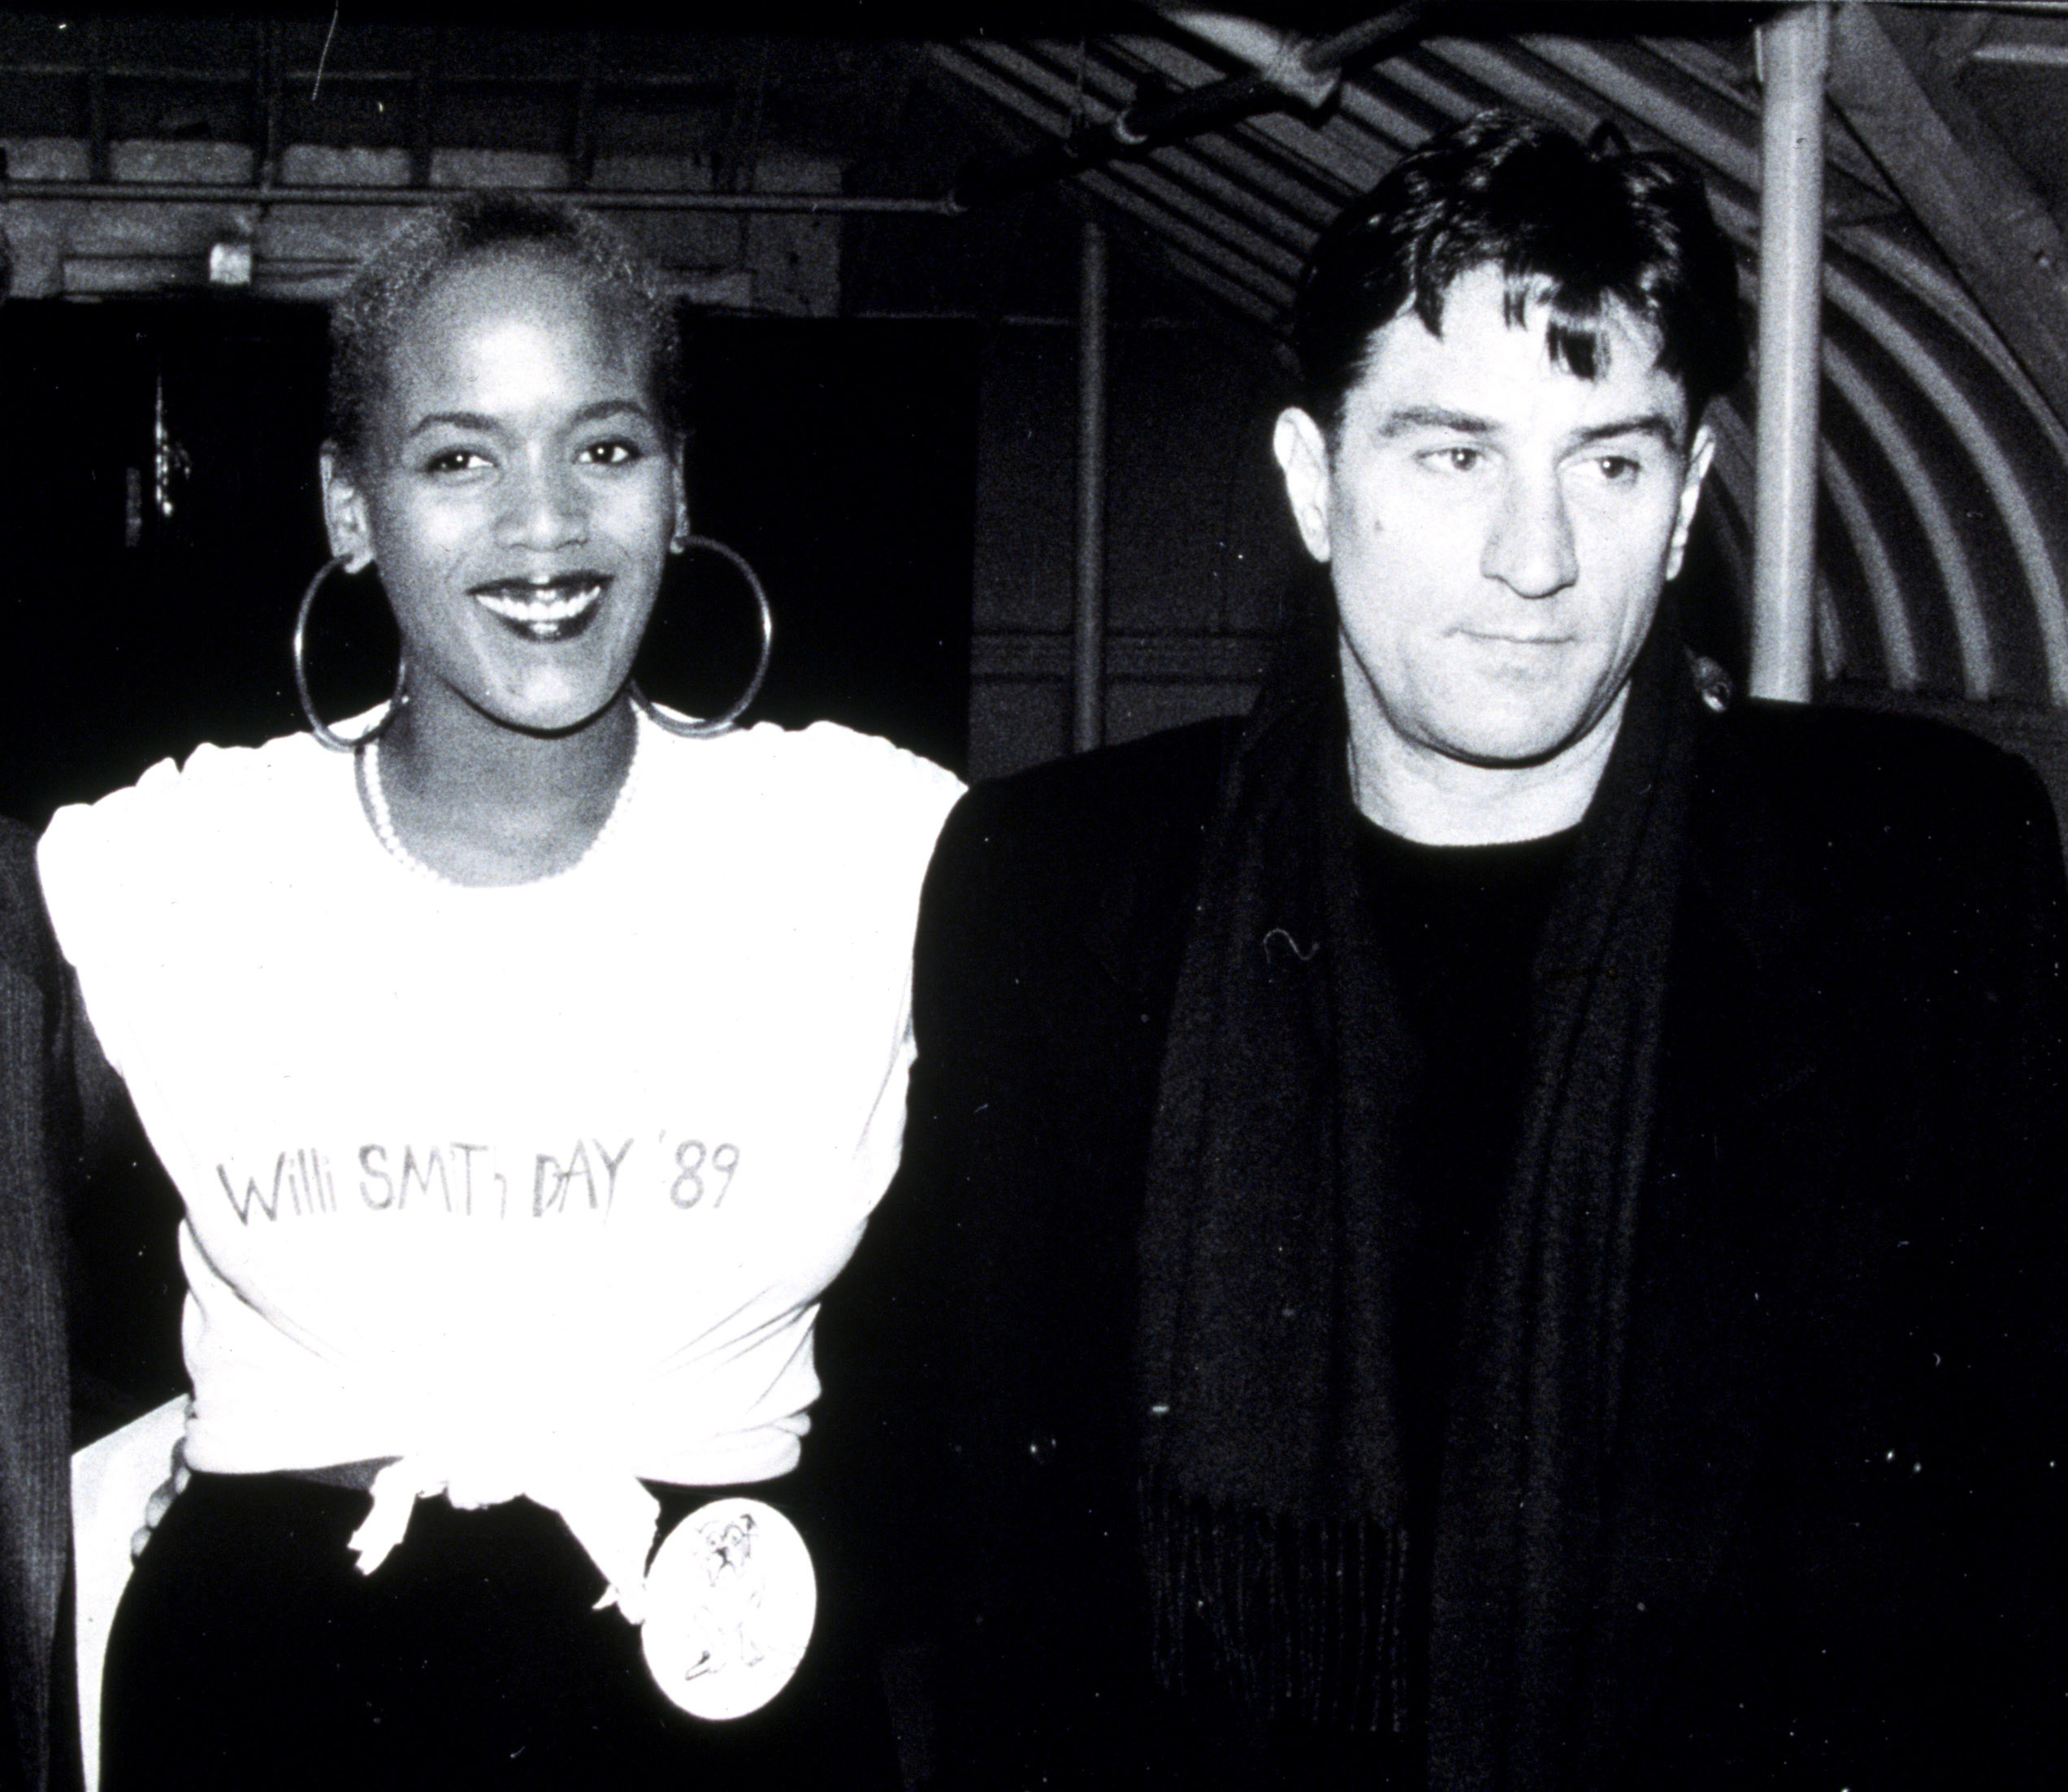 <p>Robert De Niro & Toukie Smith pictured together in 1991. The couple dated for nearly a decade in the 1990s & they welcomed twin boys Julian & Aaron De Niro in 1995 via surrogate.</p>